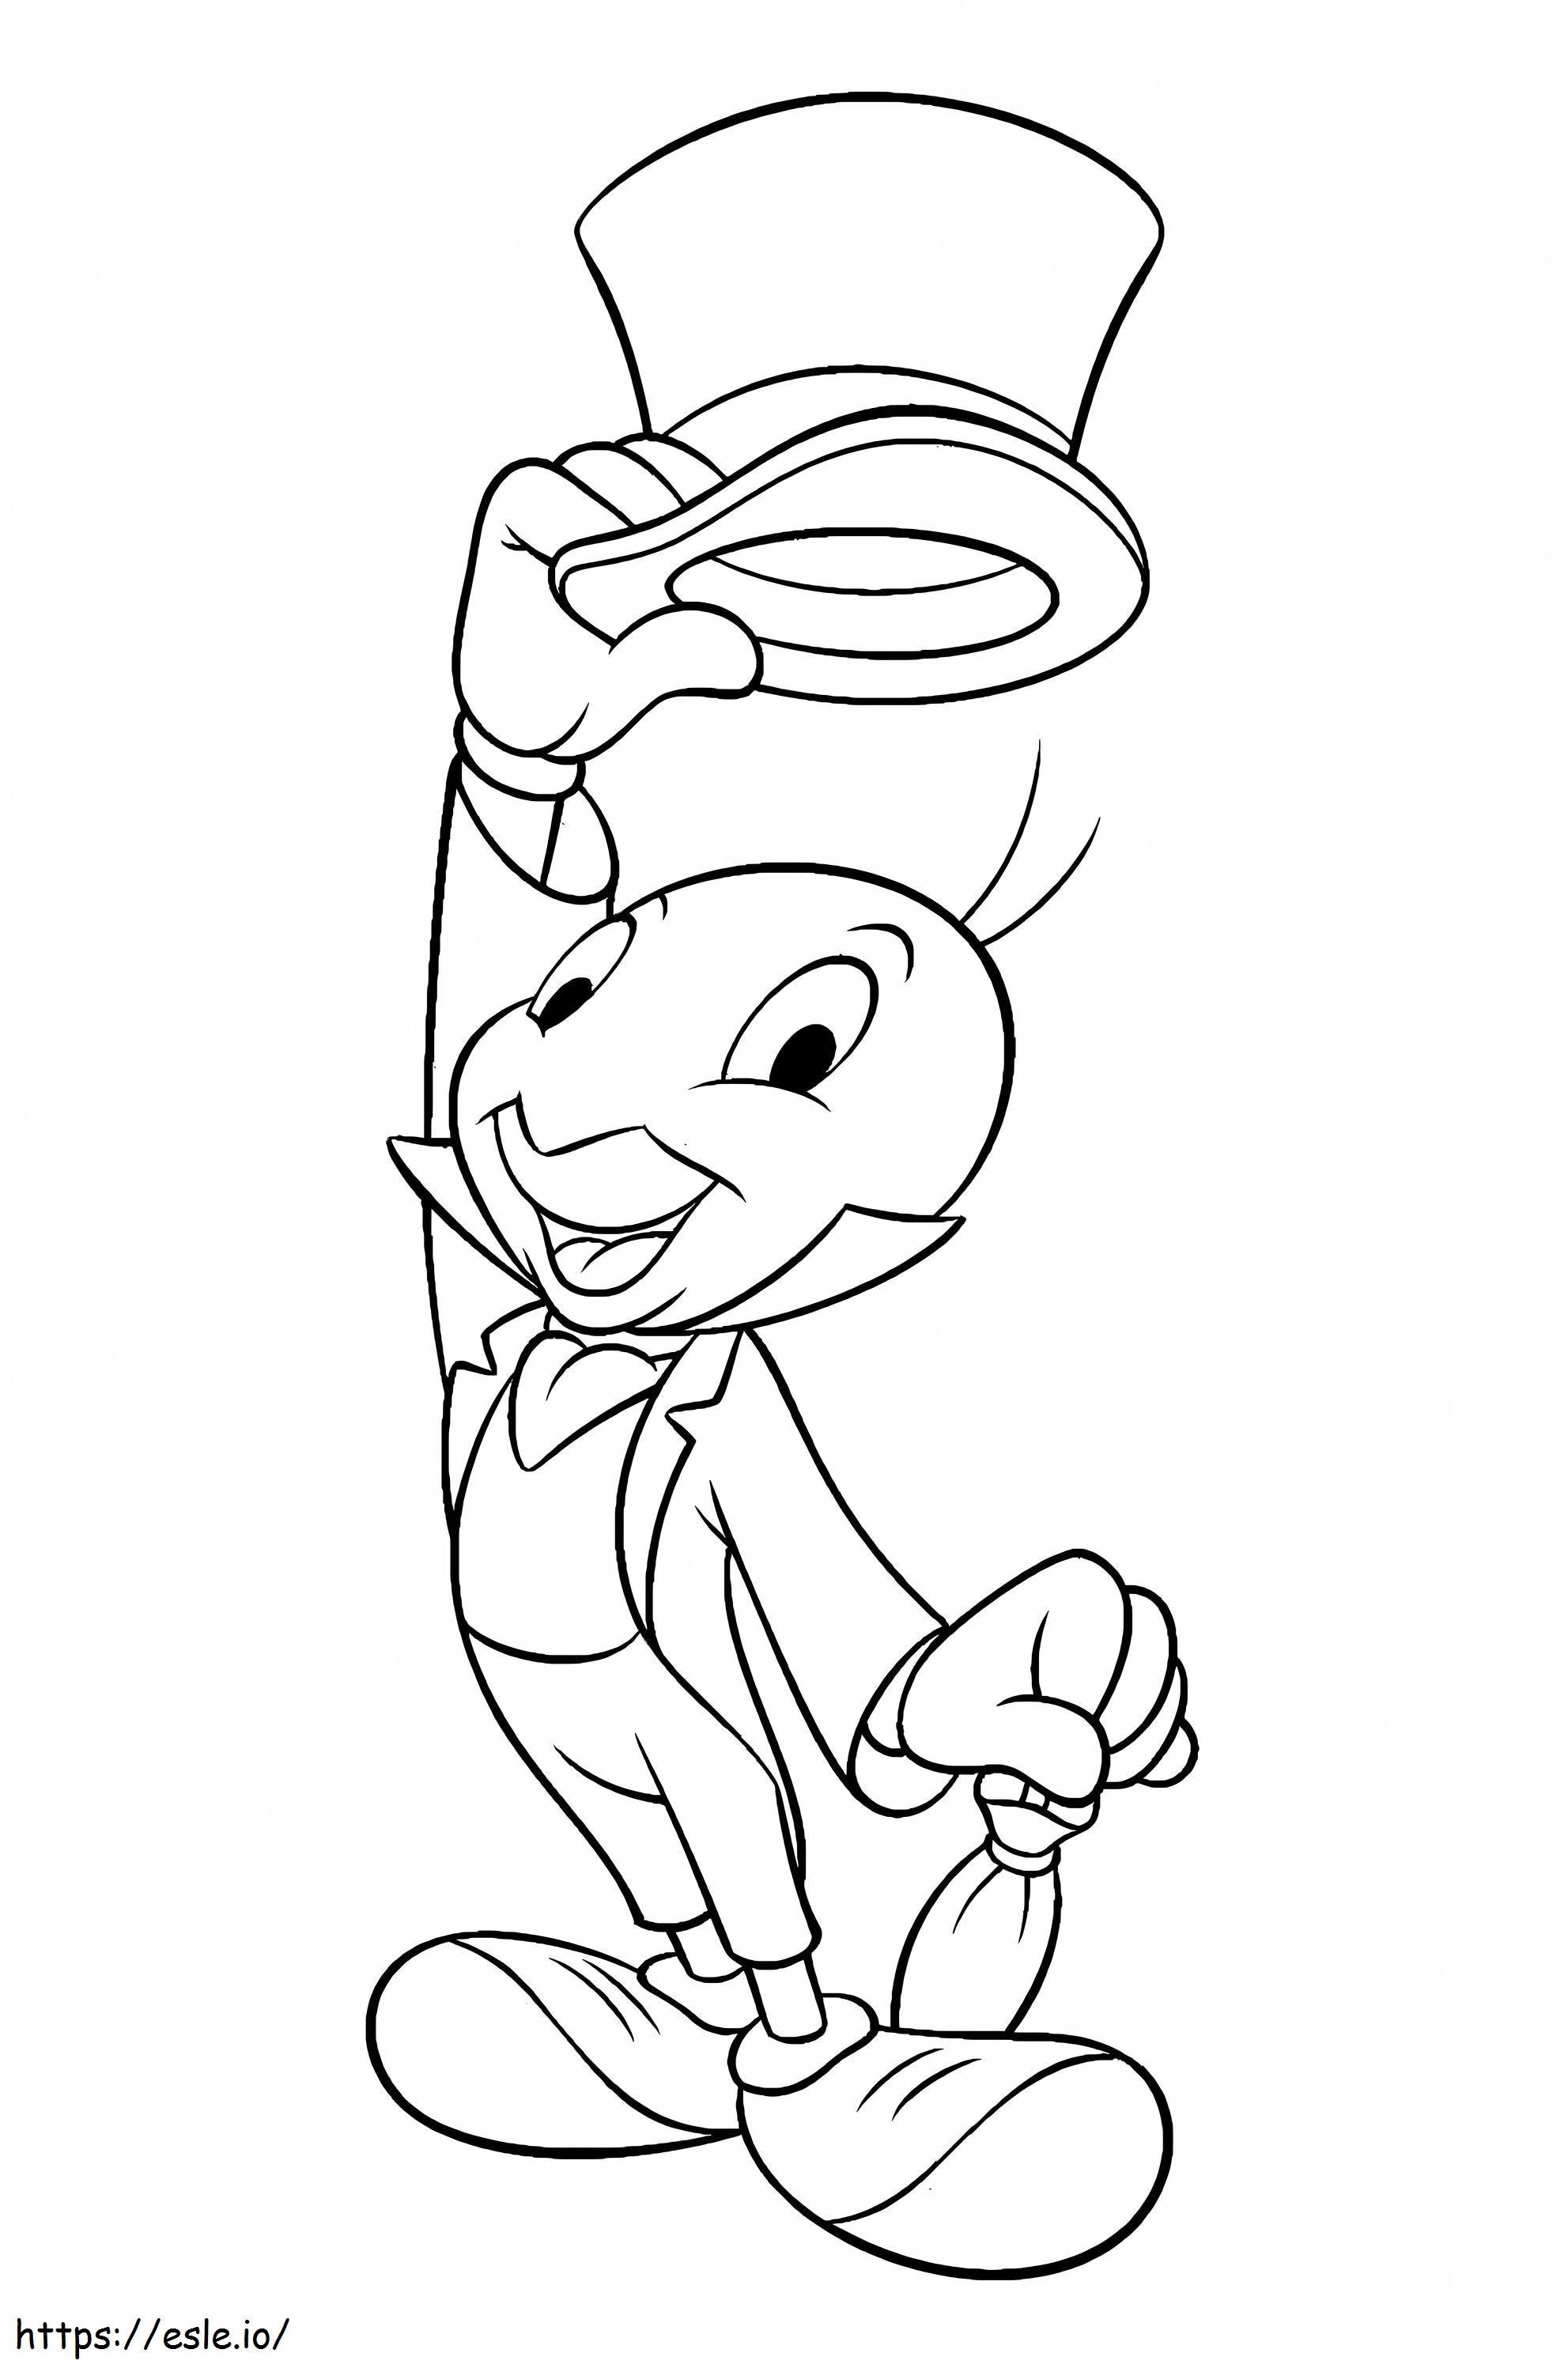 Jiminy Cricket In Pinocchio coloring page